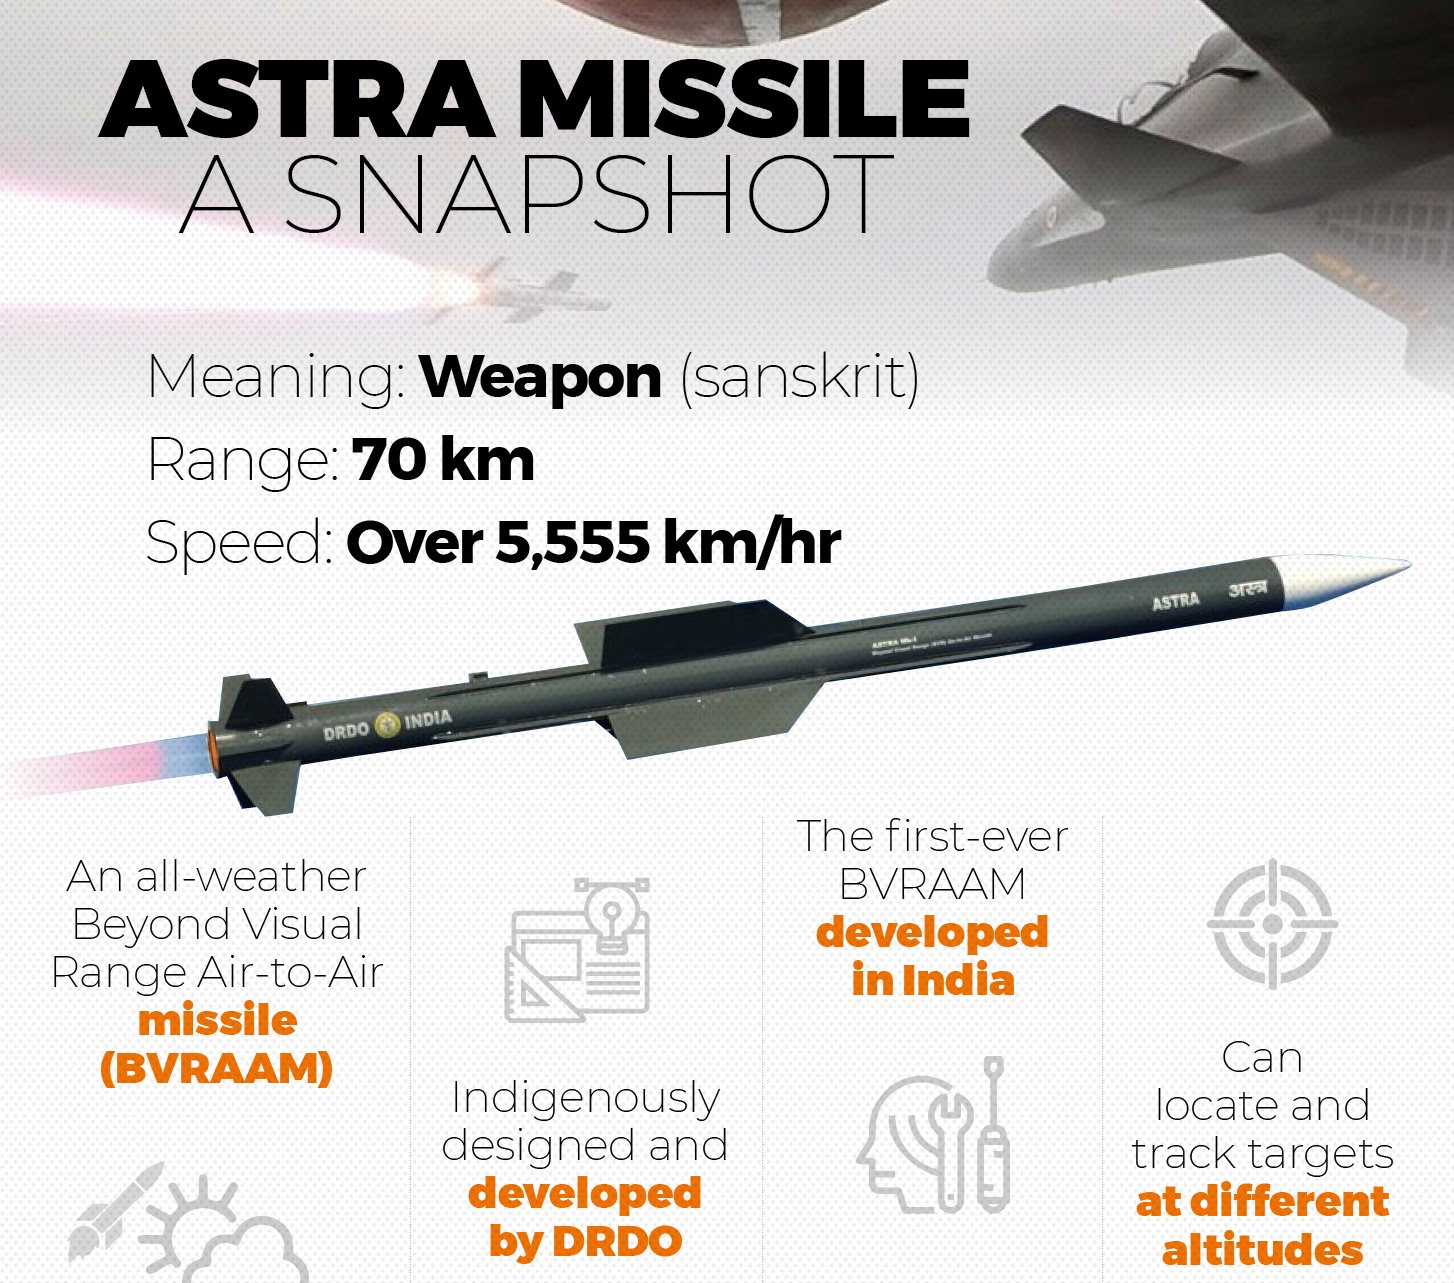 ASTRA Missile